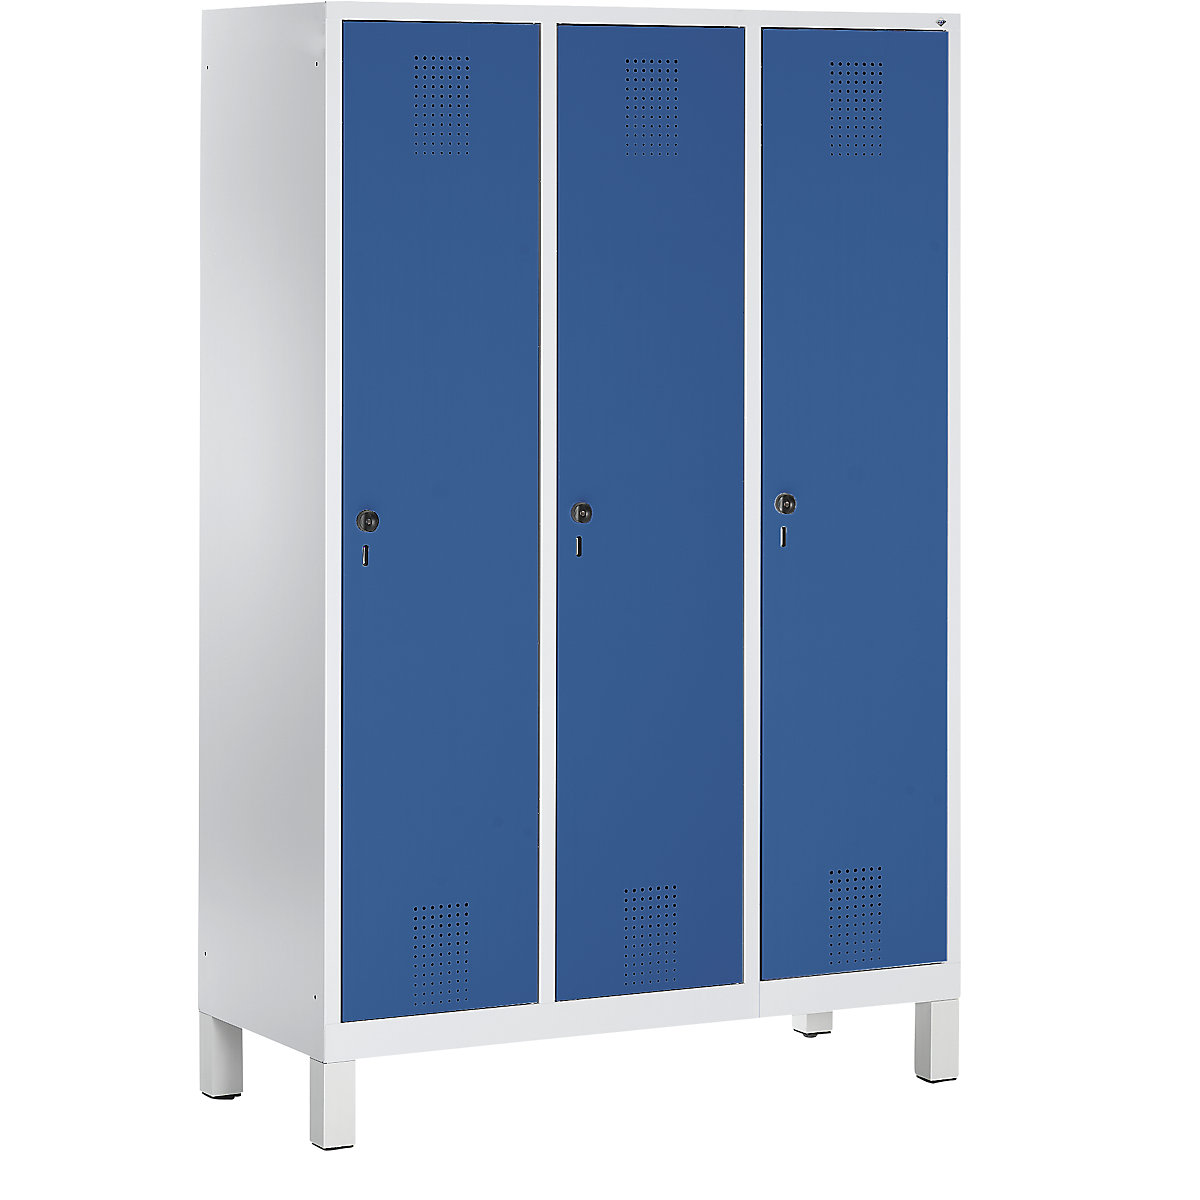 EVOLO cloakroom locker – C+P, with plastic feet, 3 compartments, compartment width 400 mm, light grey / gentian blue-7